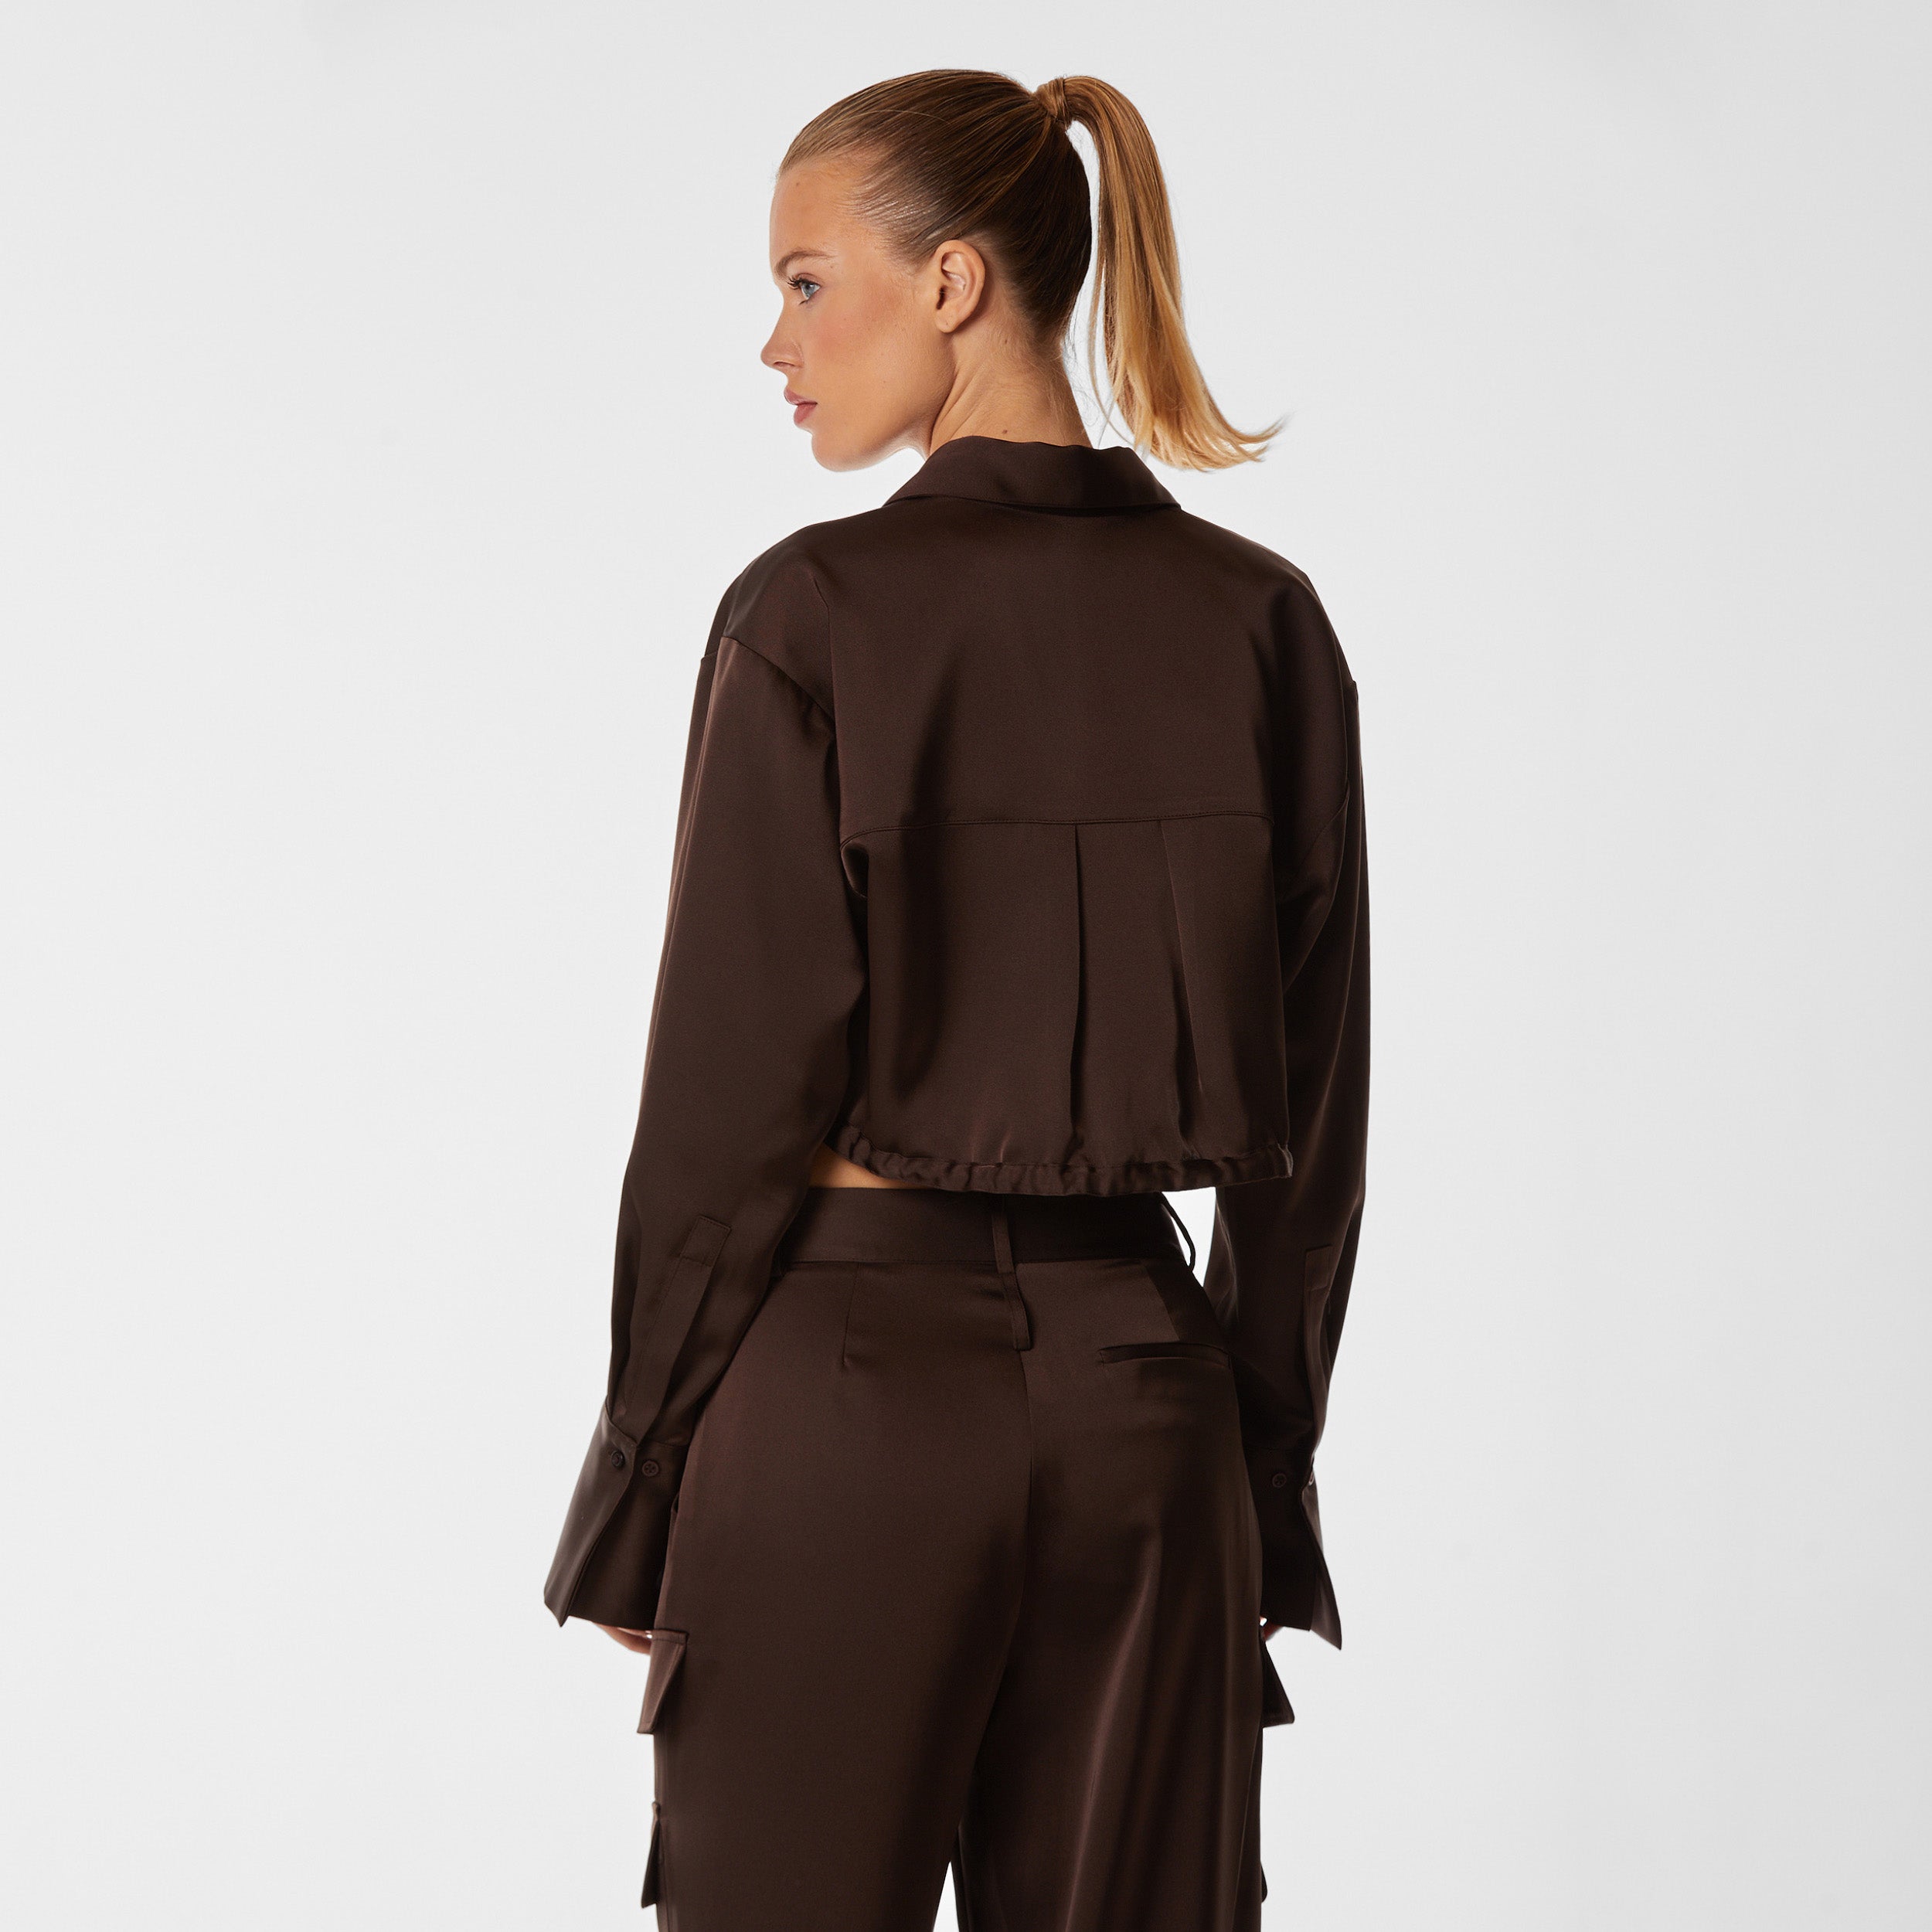 Rear view of woman wearing brown Milan Satin Button Up features luxurious and structured satin-like fabric, featuring cargo detailing, shell buttons and a tie-waist